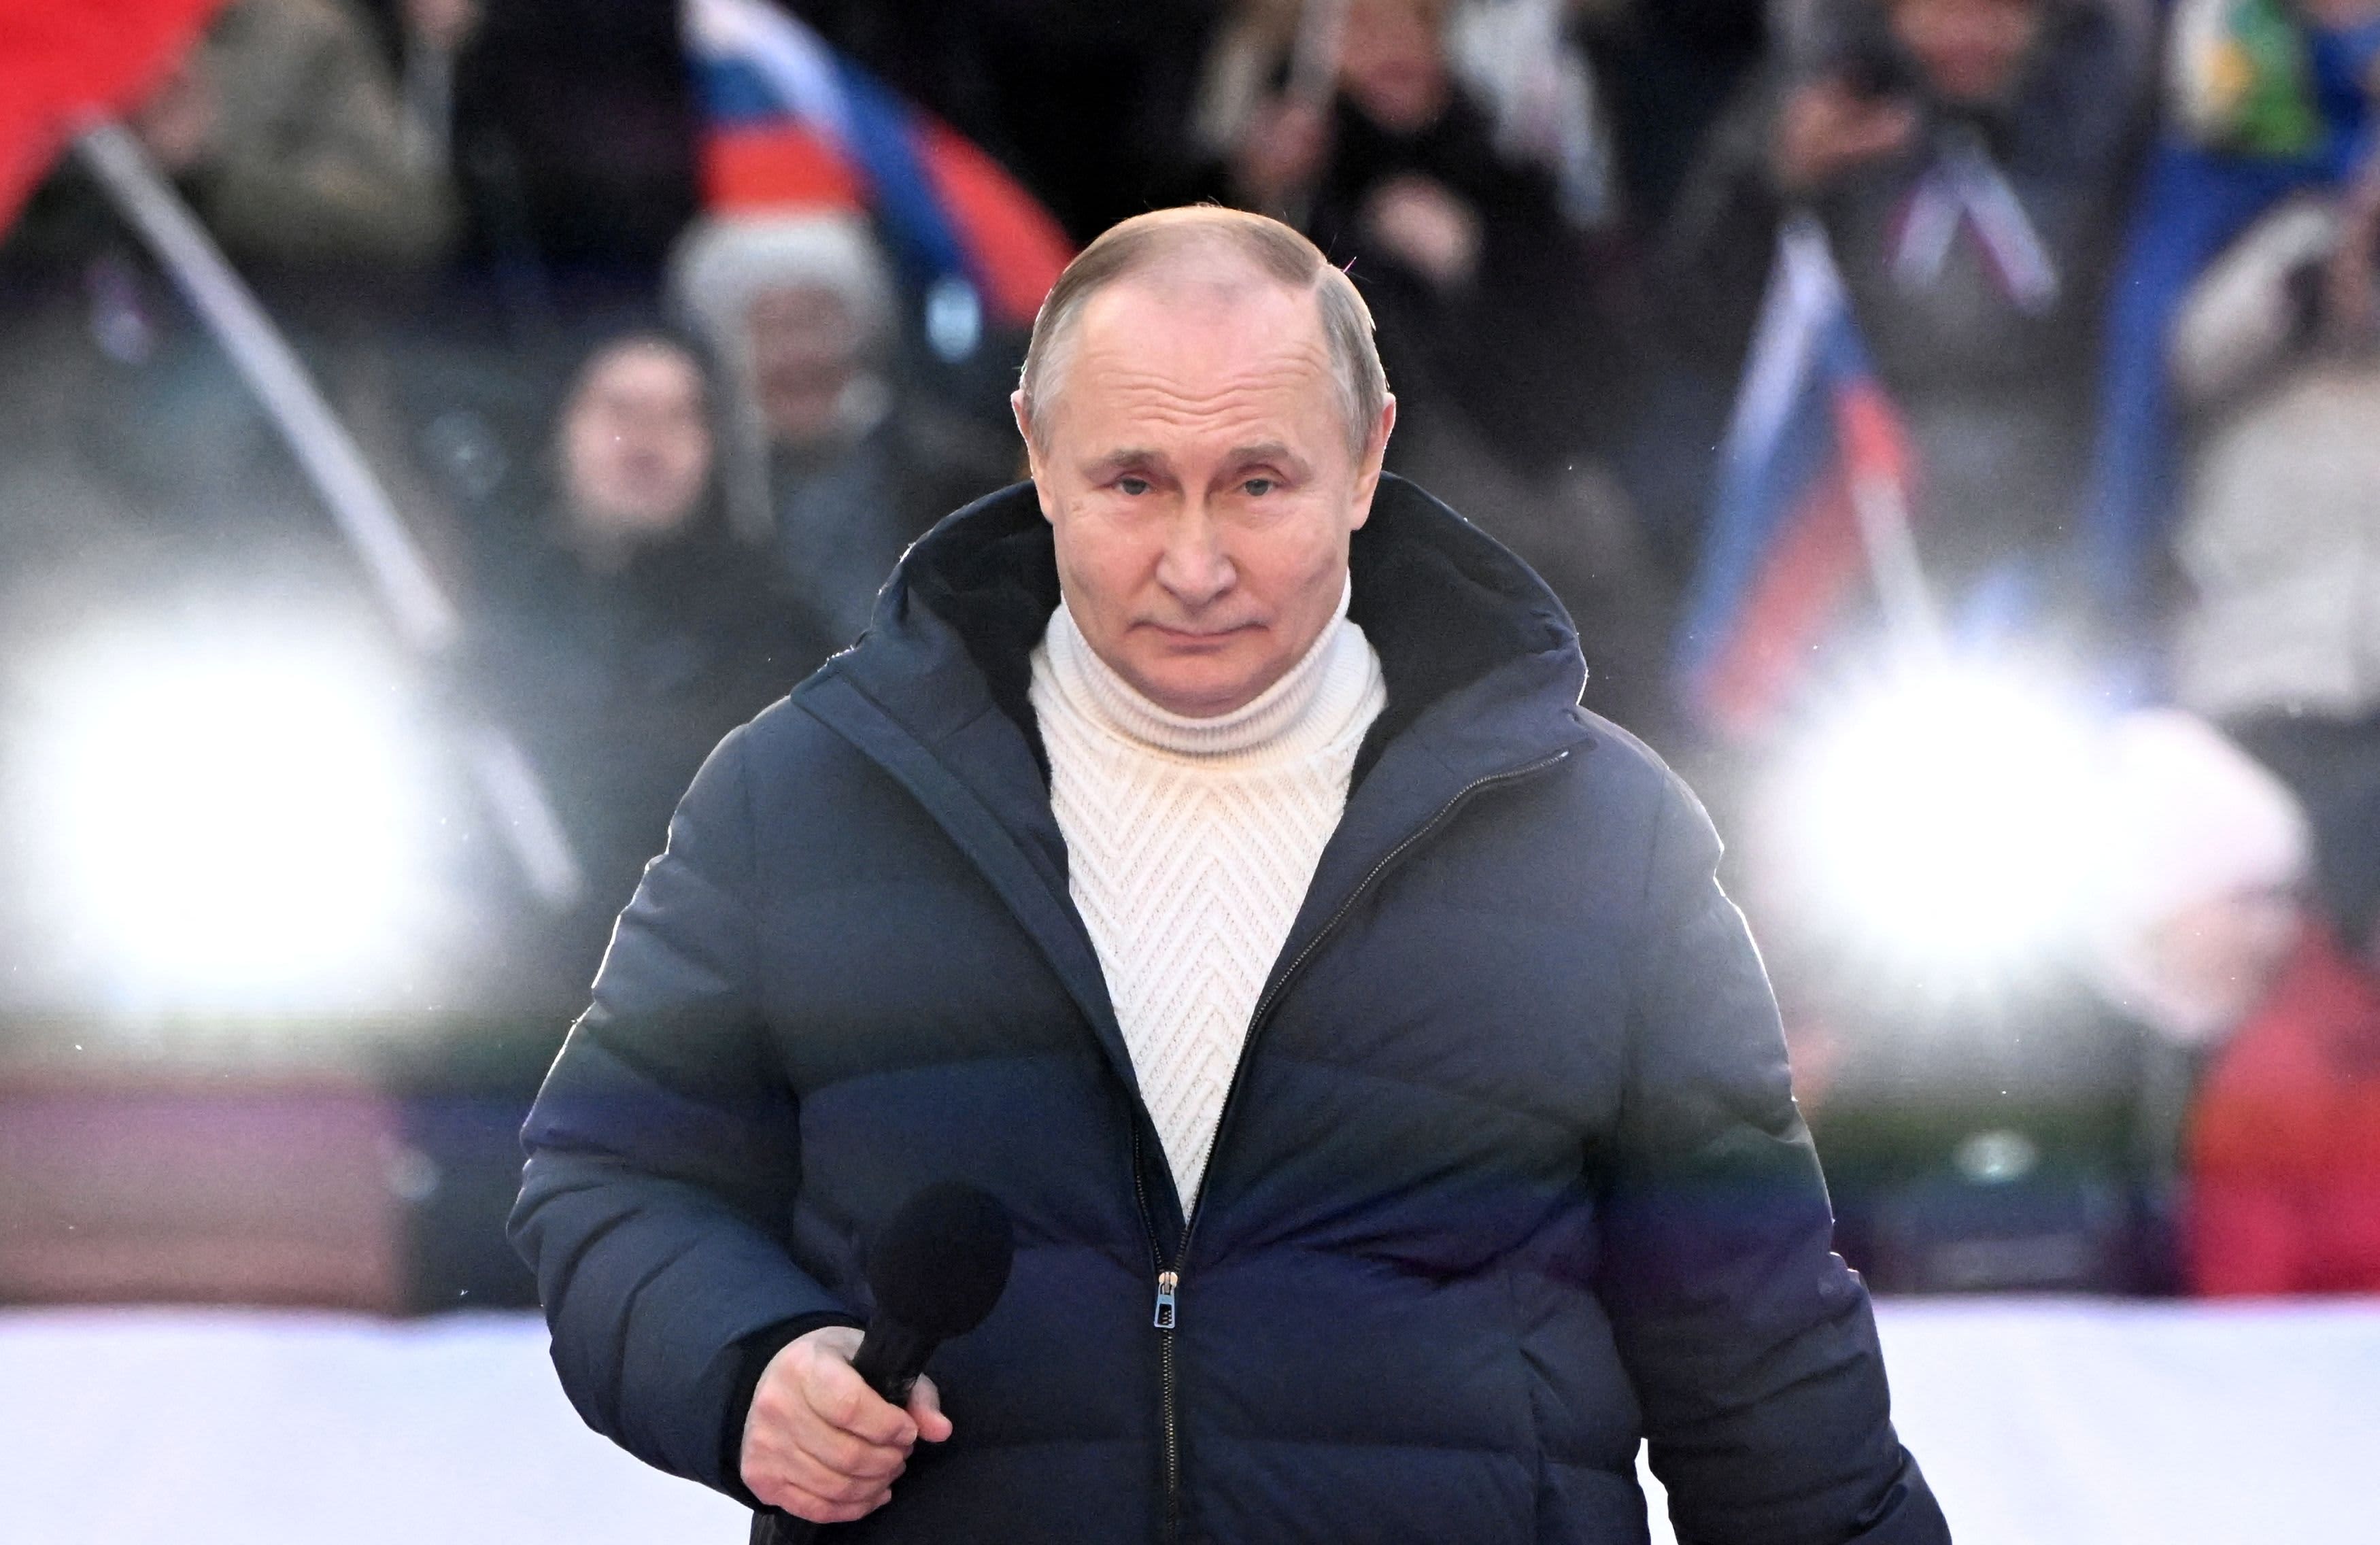 Can Putin Be Overthrown? Russia's Leader Has Sought To Prevent A Coup